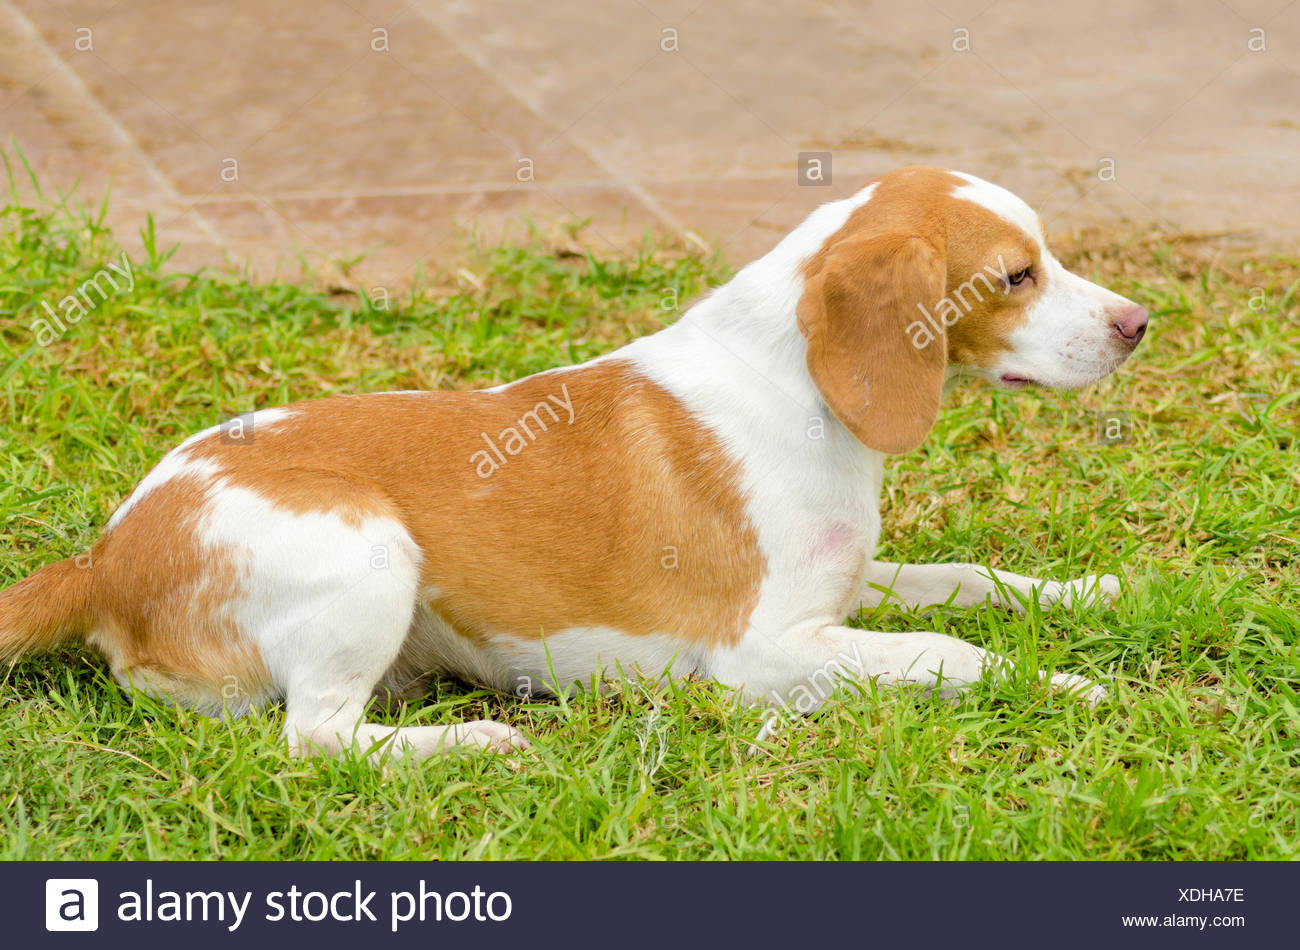 A Young Beautiful White And Orange Istrian Shorthaired Hound Puppy Dog Sitting On The Lawn The Istrian Short Haired Hound Is A Scent Hound Dog For Hunting Hare And Foxes Stock Photo